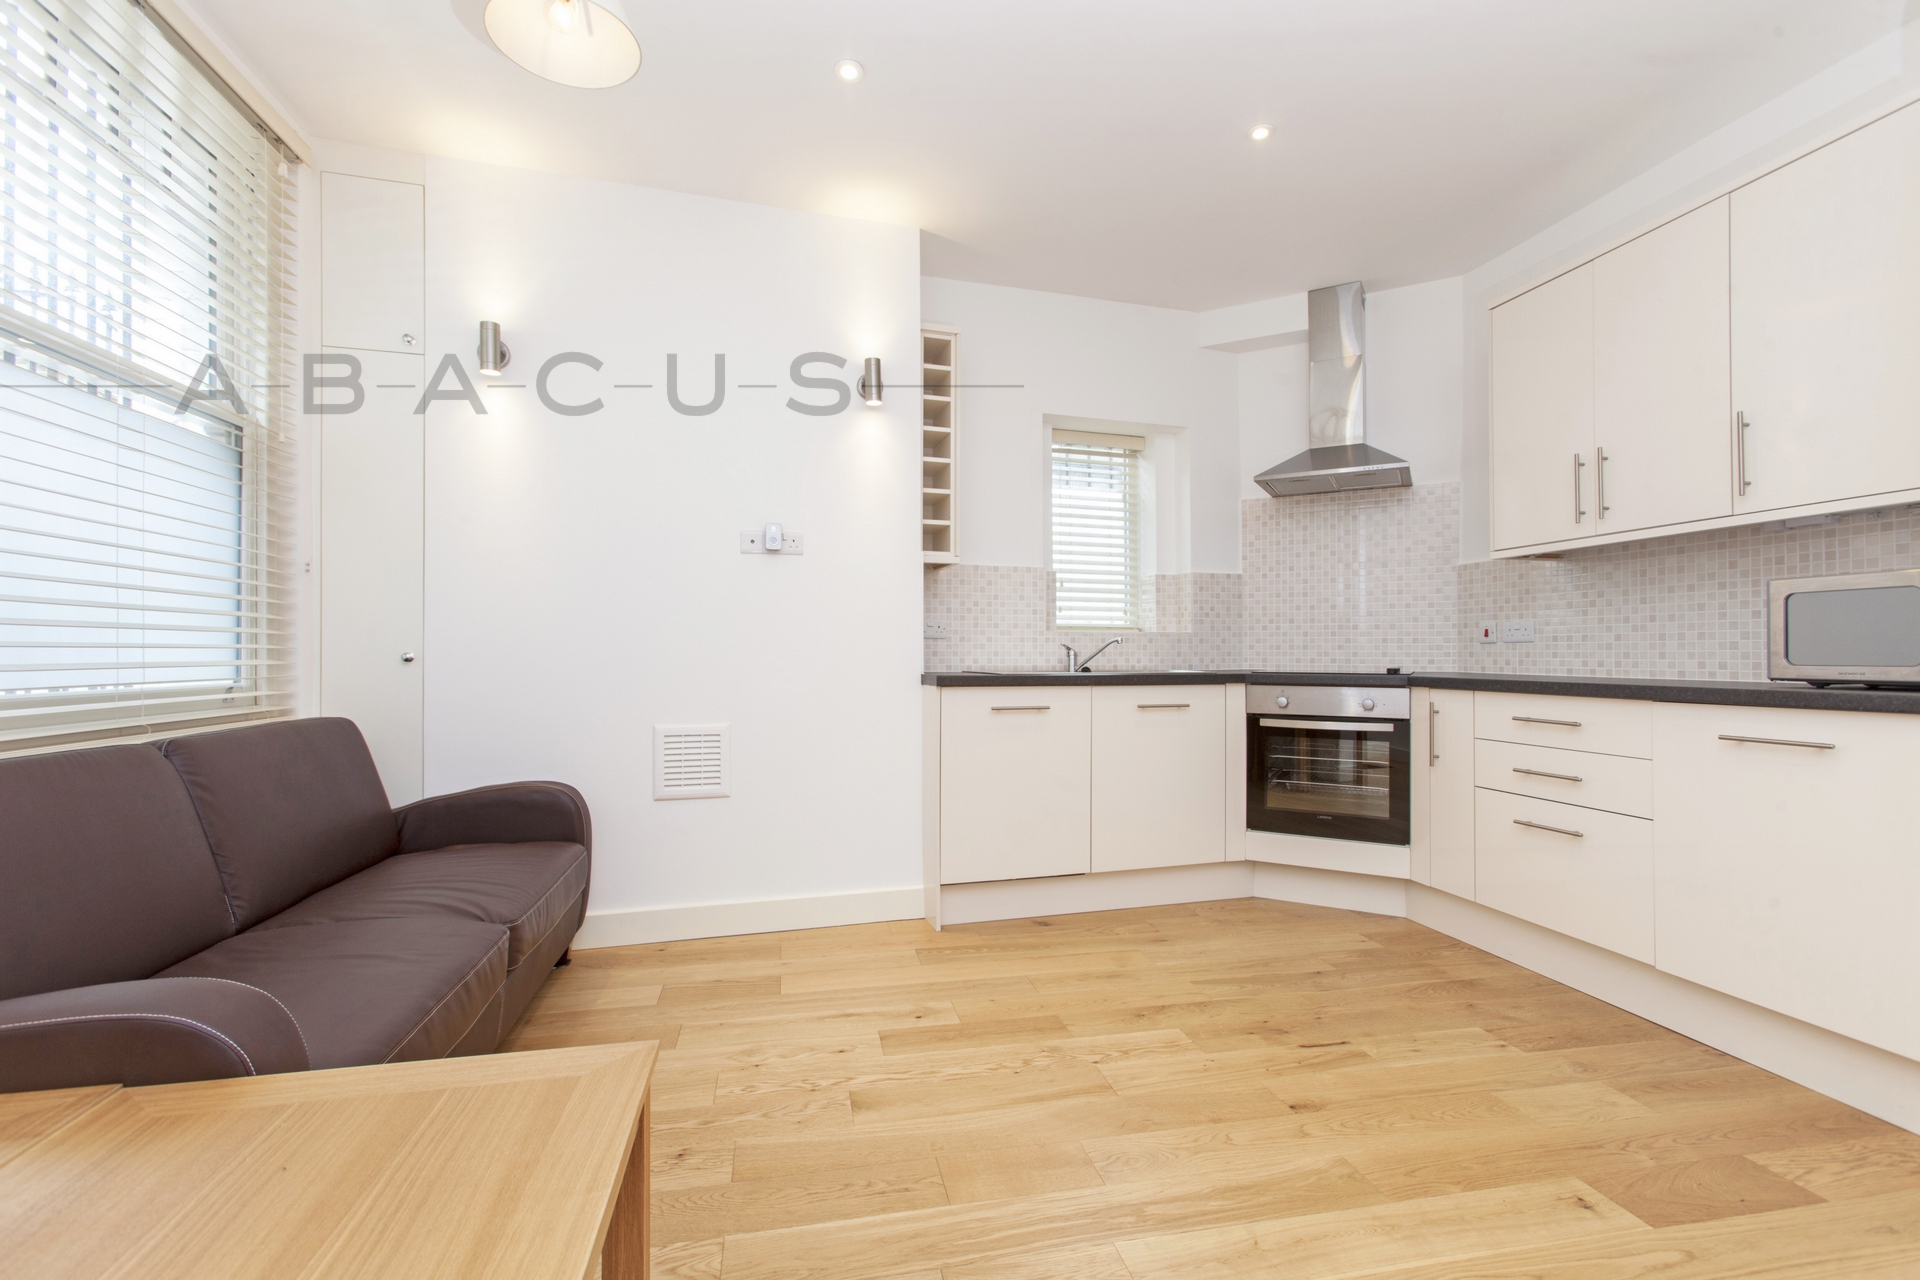 2 Bedroom Flat to rent in West Hampstead, London, NW6